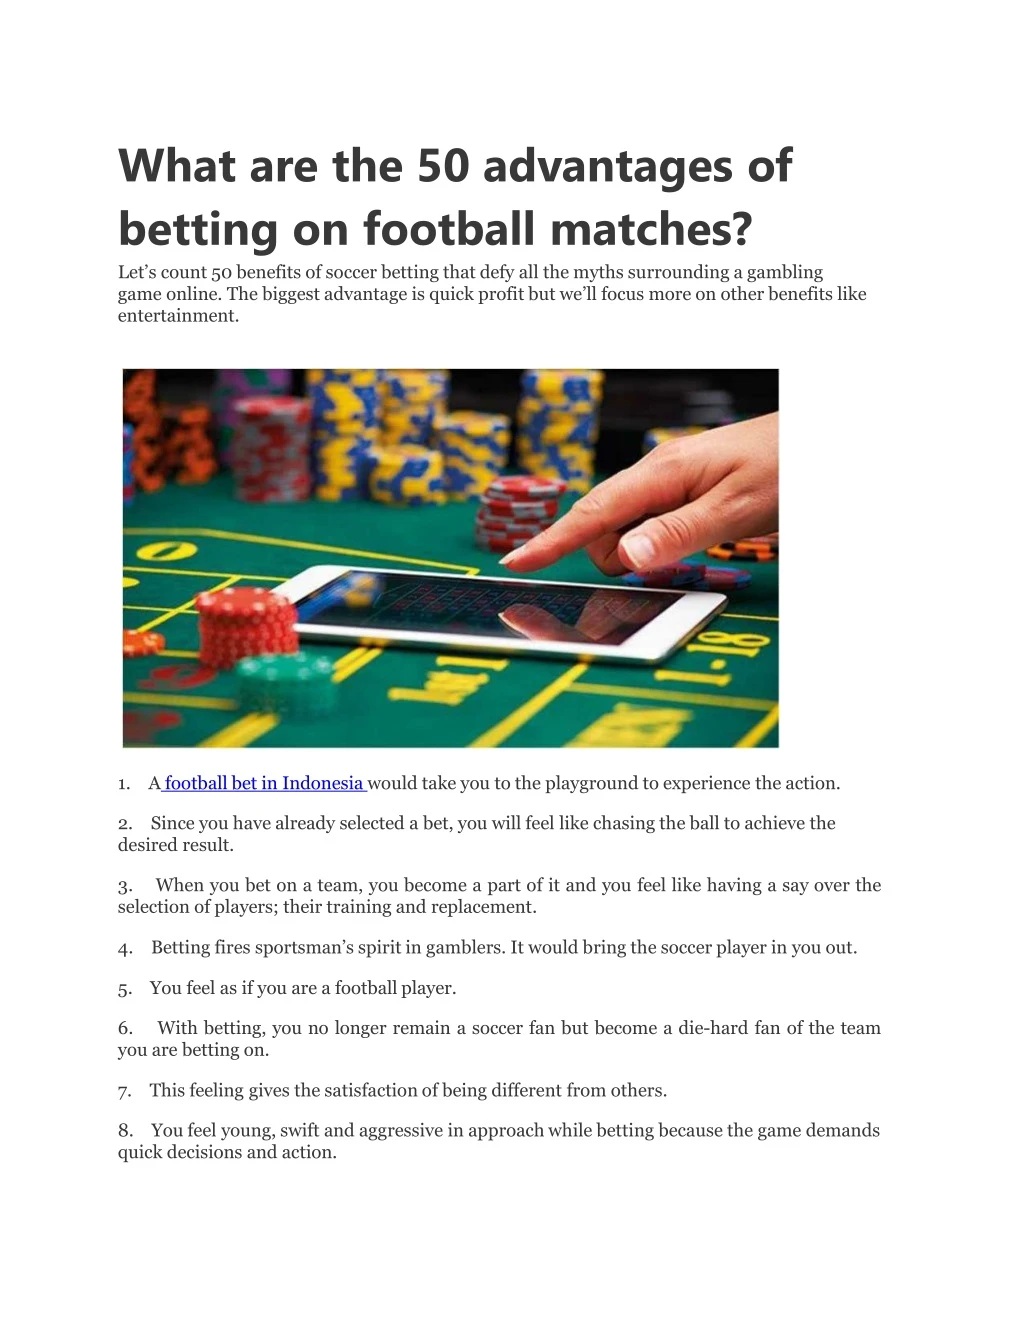 what are the 50 advantages of betting on football